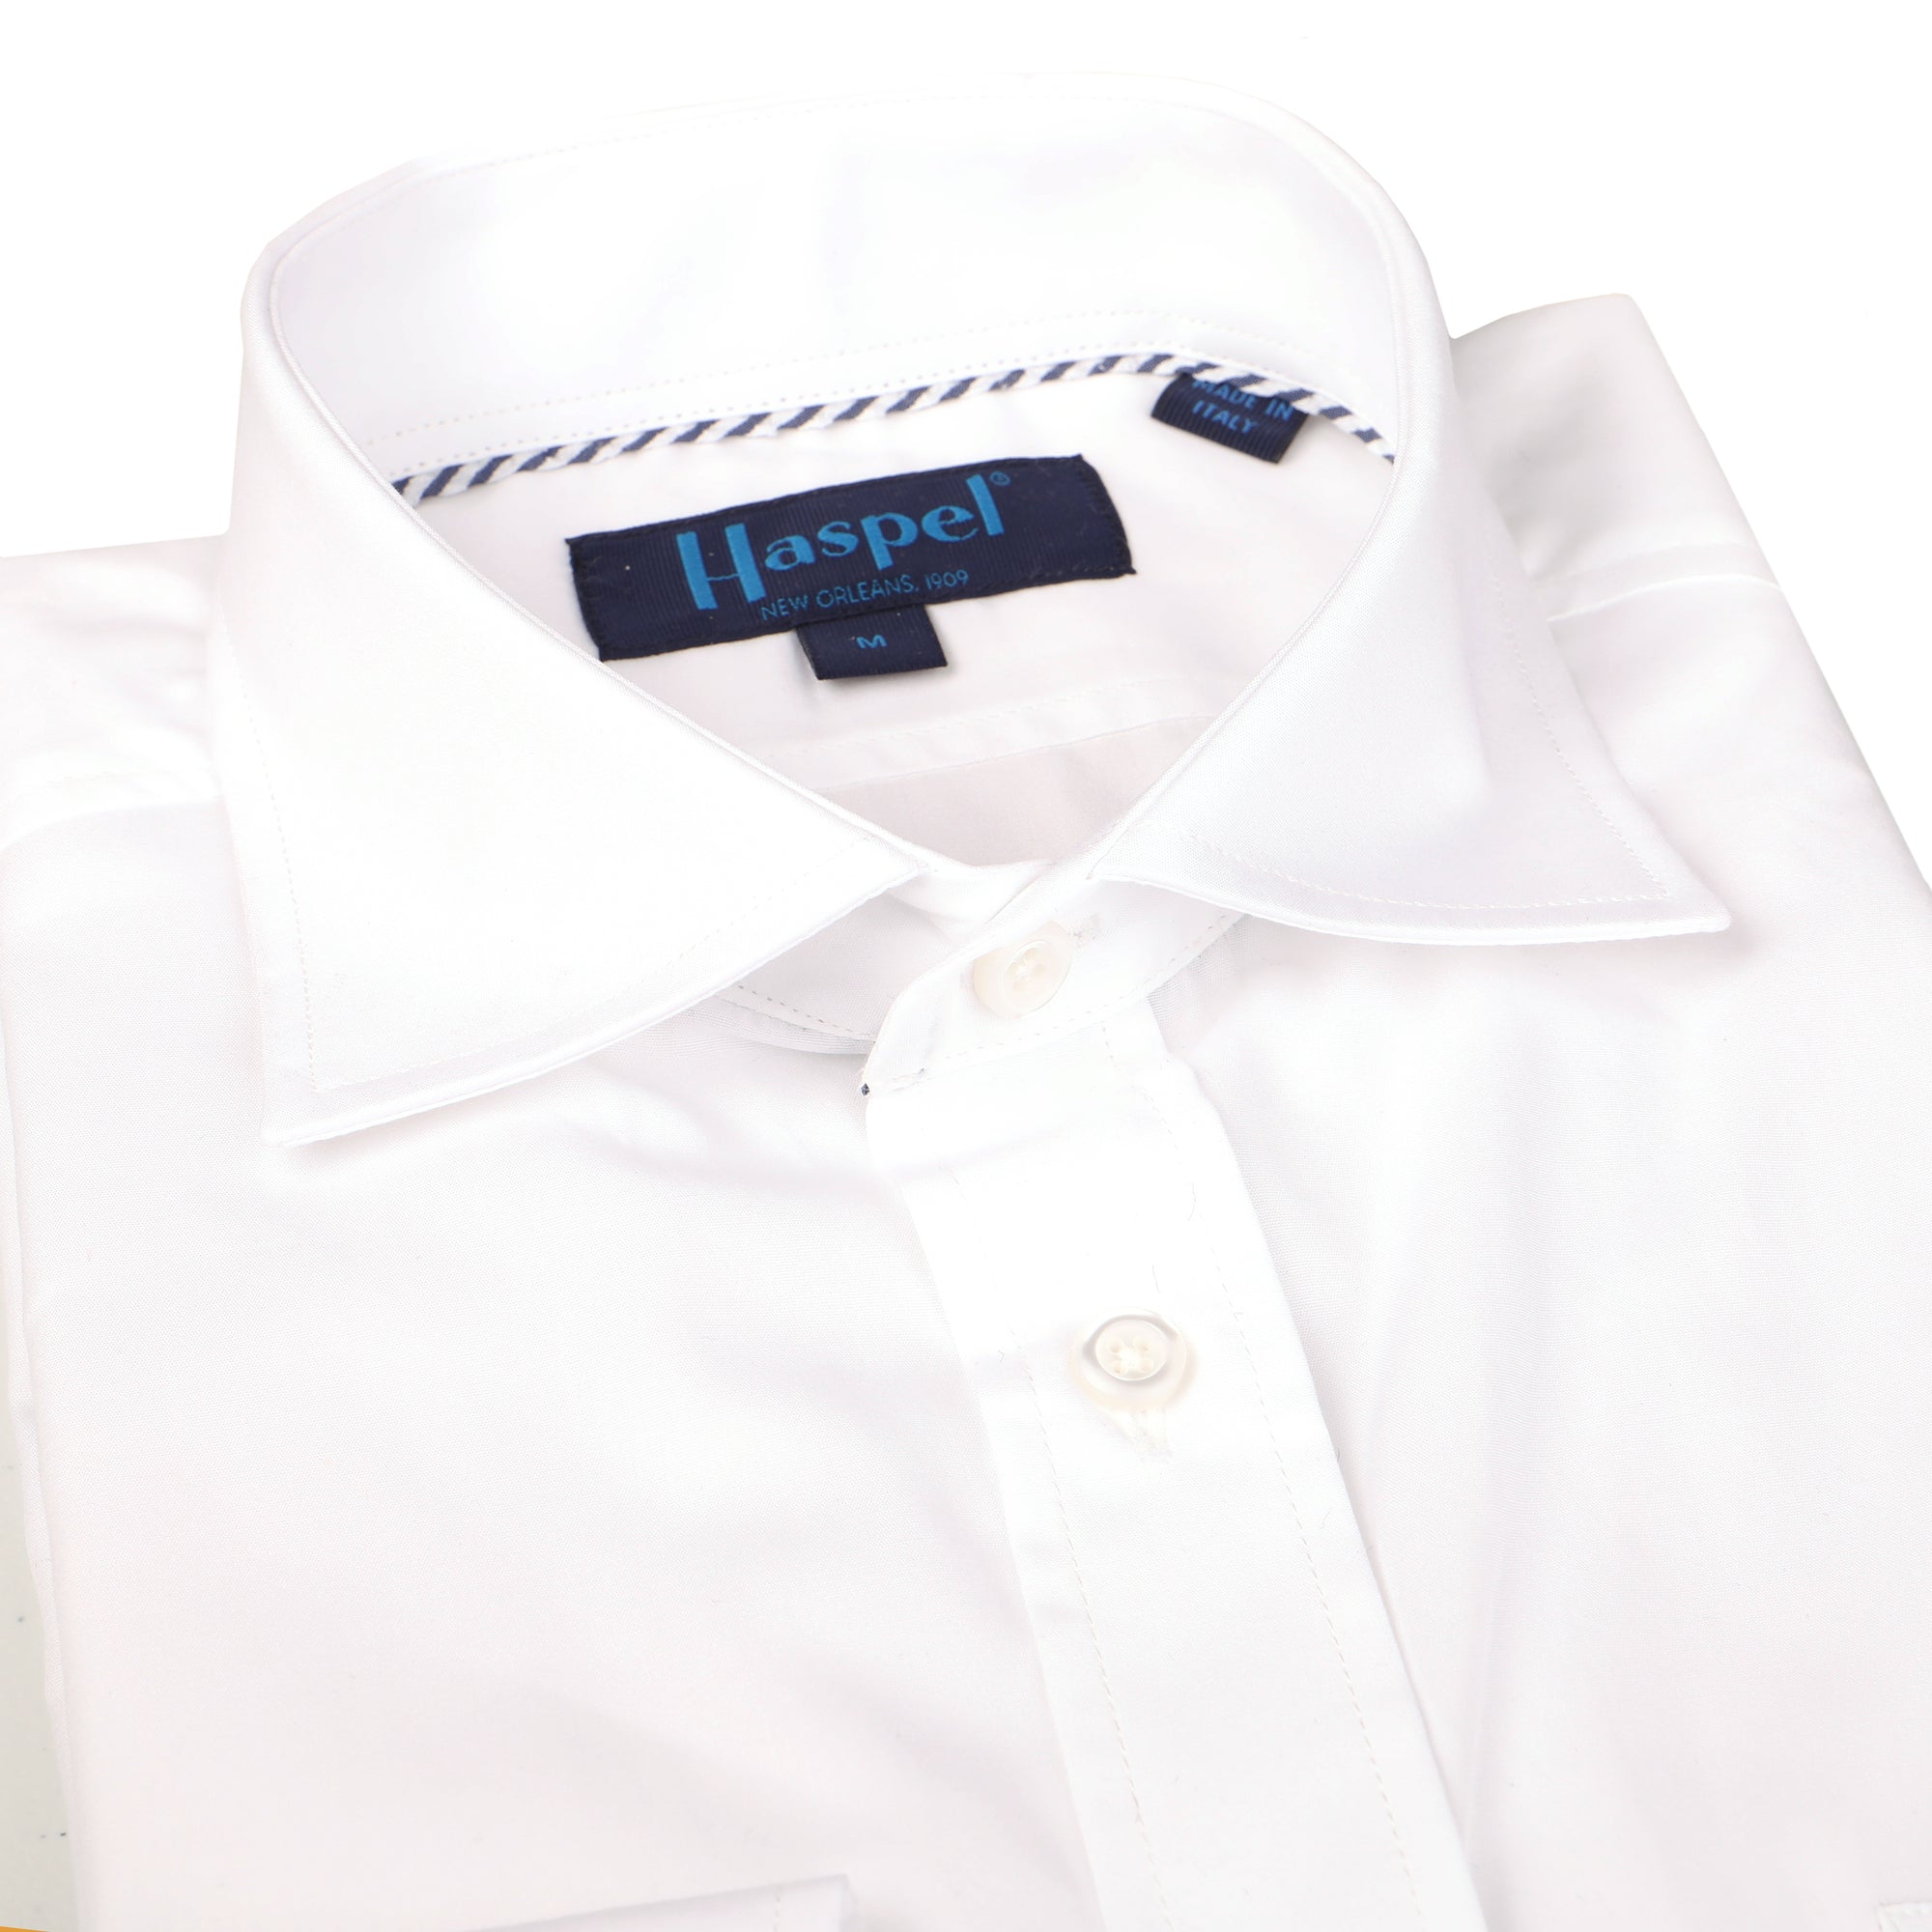 Keep poppin' in poplin. Solid white, solid look. Nothing better than a new crisp white shirt.  100% Cotton  •  Long Sleeve  •  Spread Collar  •  Chest Pocket  •  Button Cuff  •  Machine Washable  •  Made in Italy Return Policy